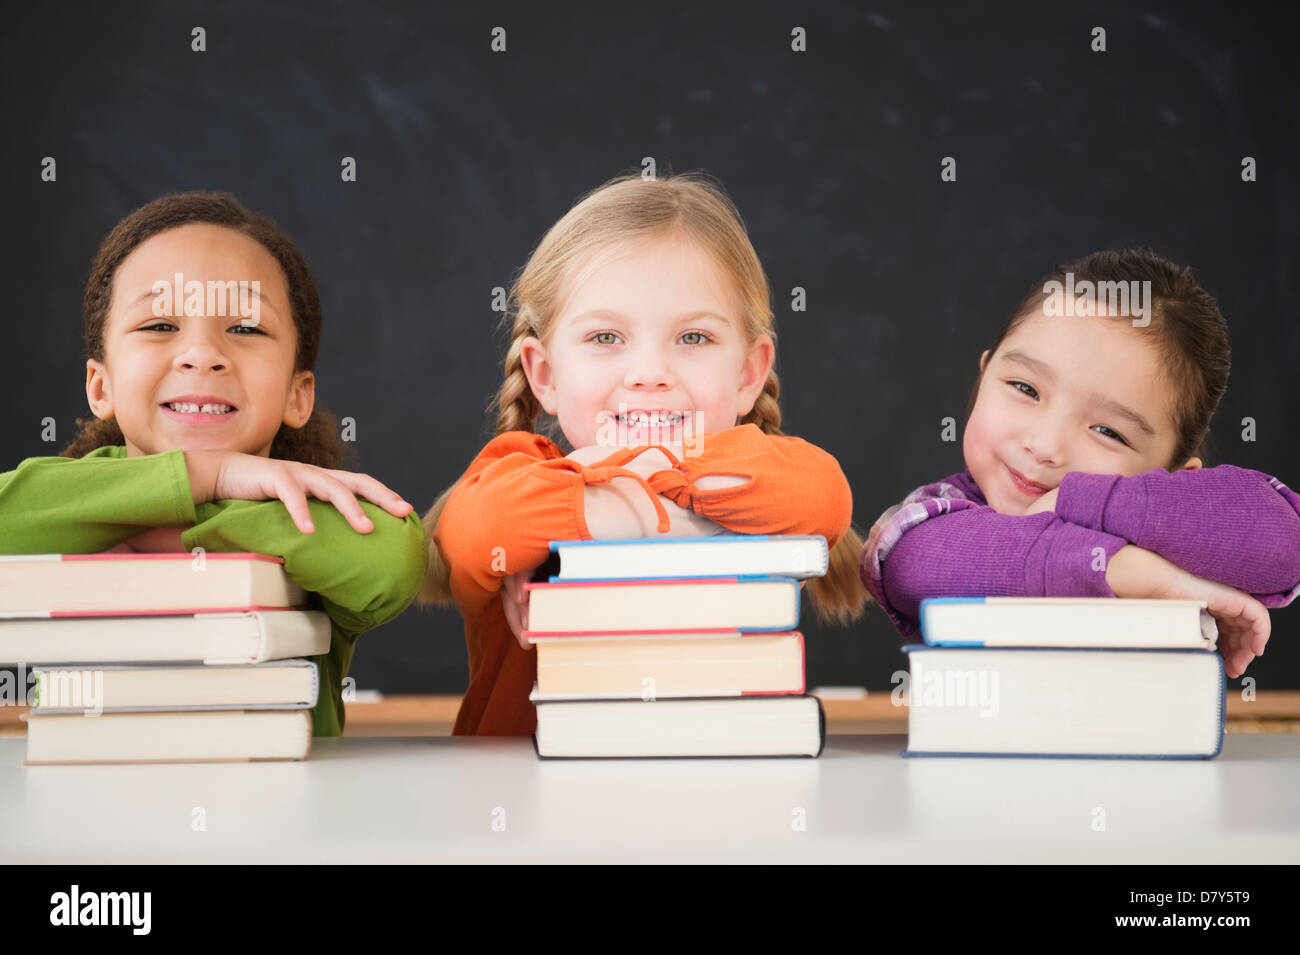 Girls leaning on stacks of books in classroom Stock Photo